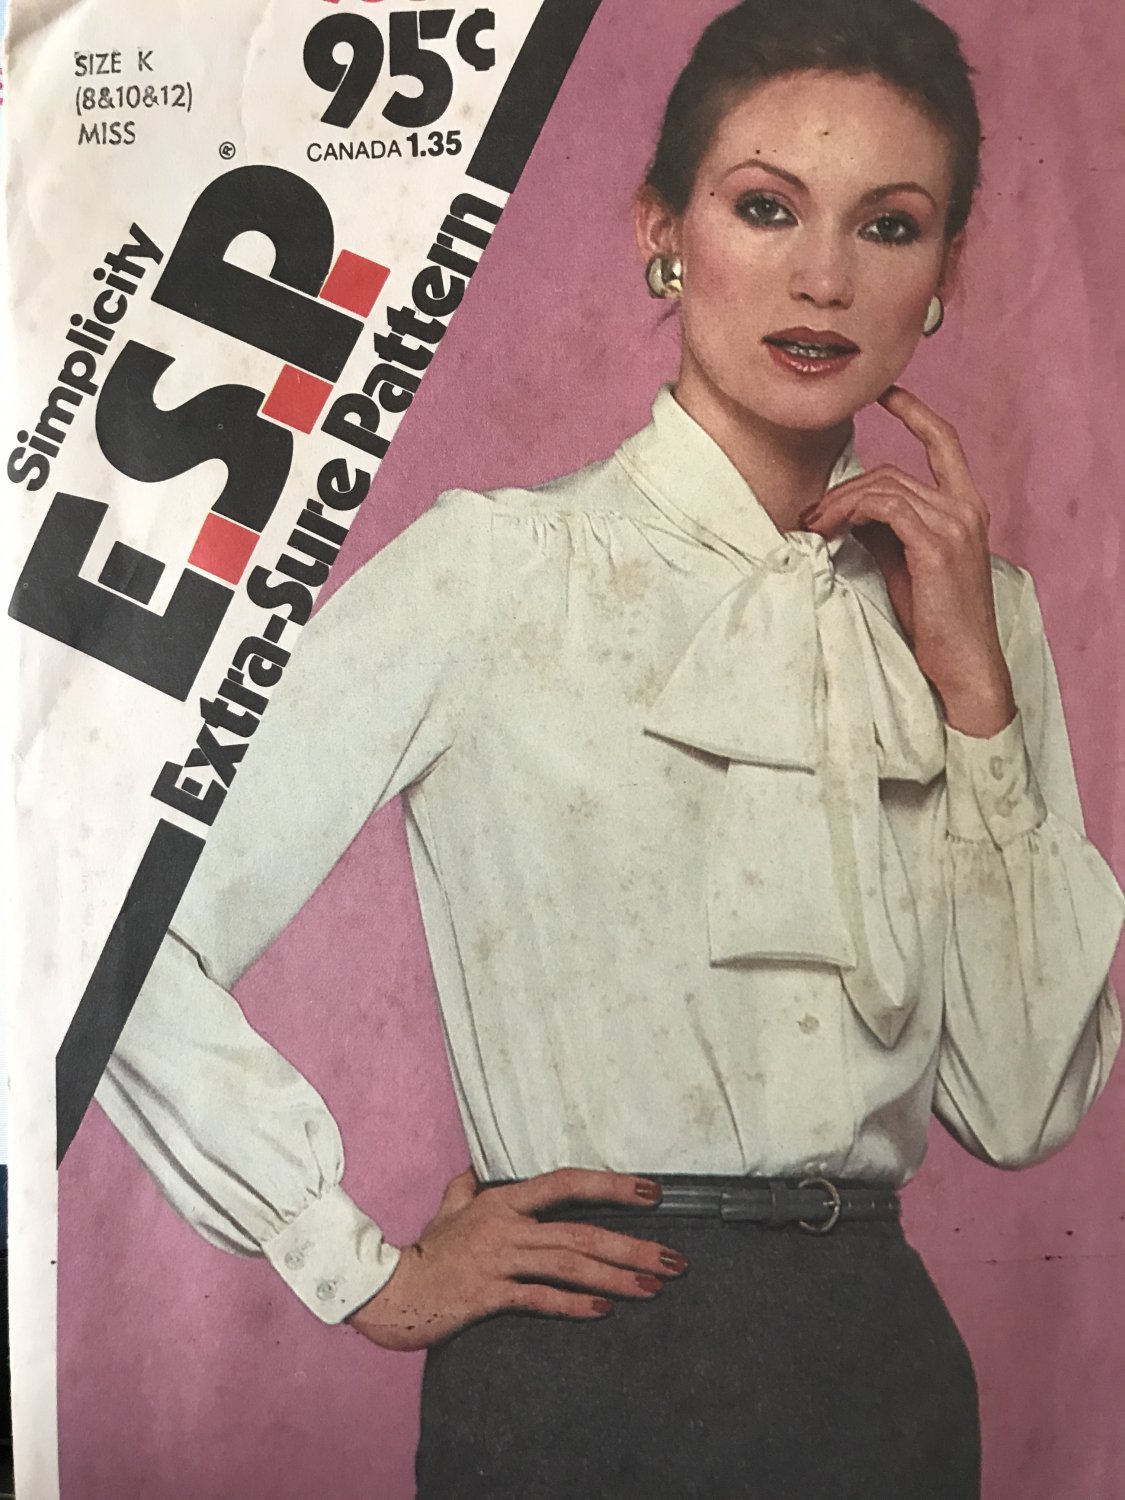 Simplicity Sewing Pattern 9581 Misses' Blouse sizes 8 10 12